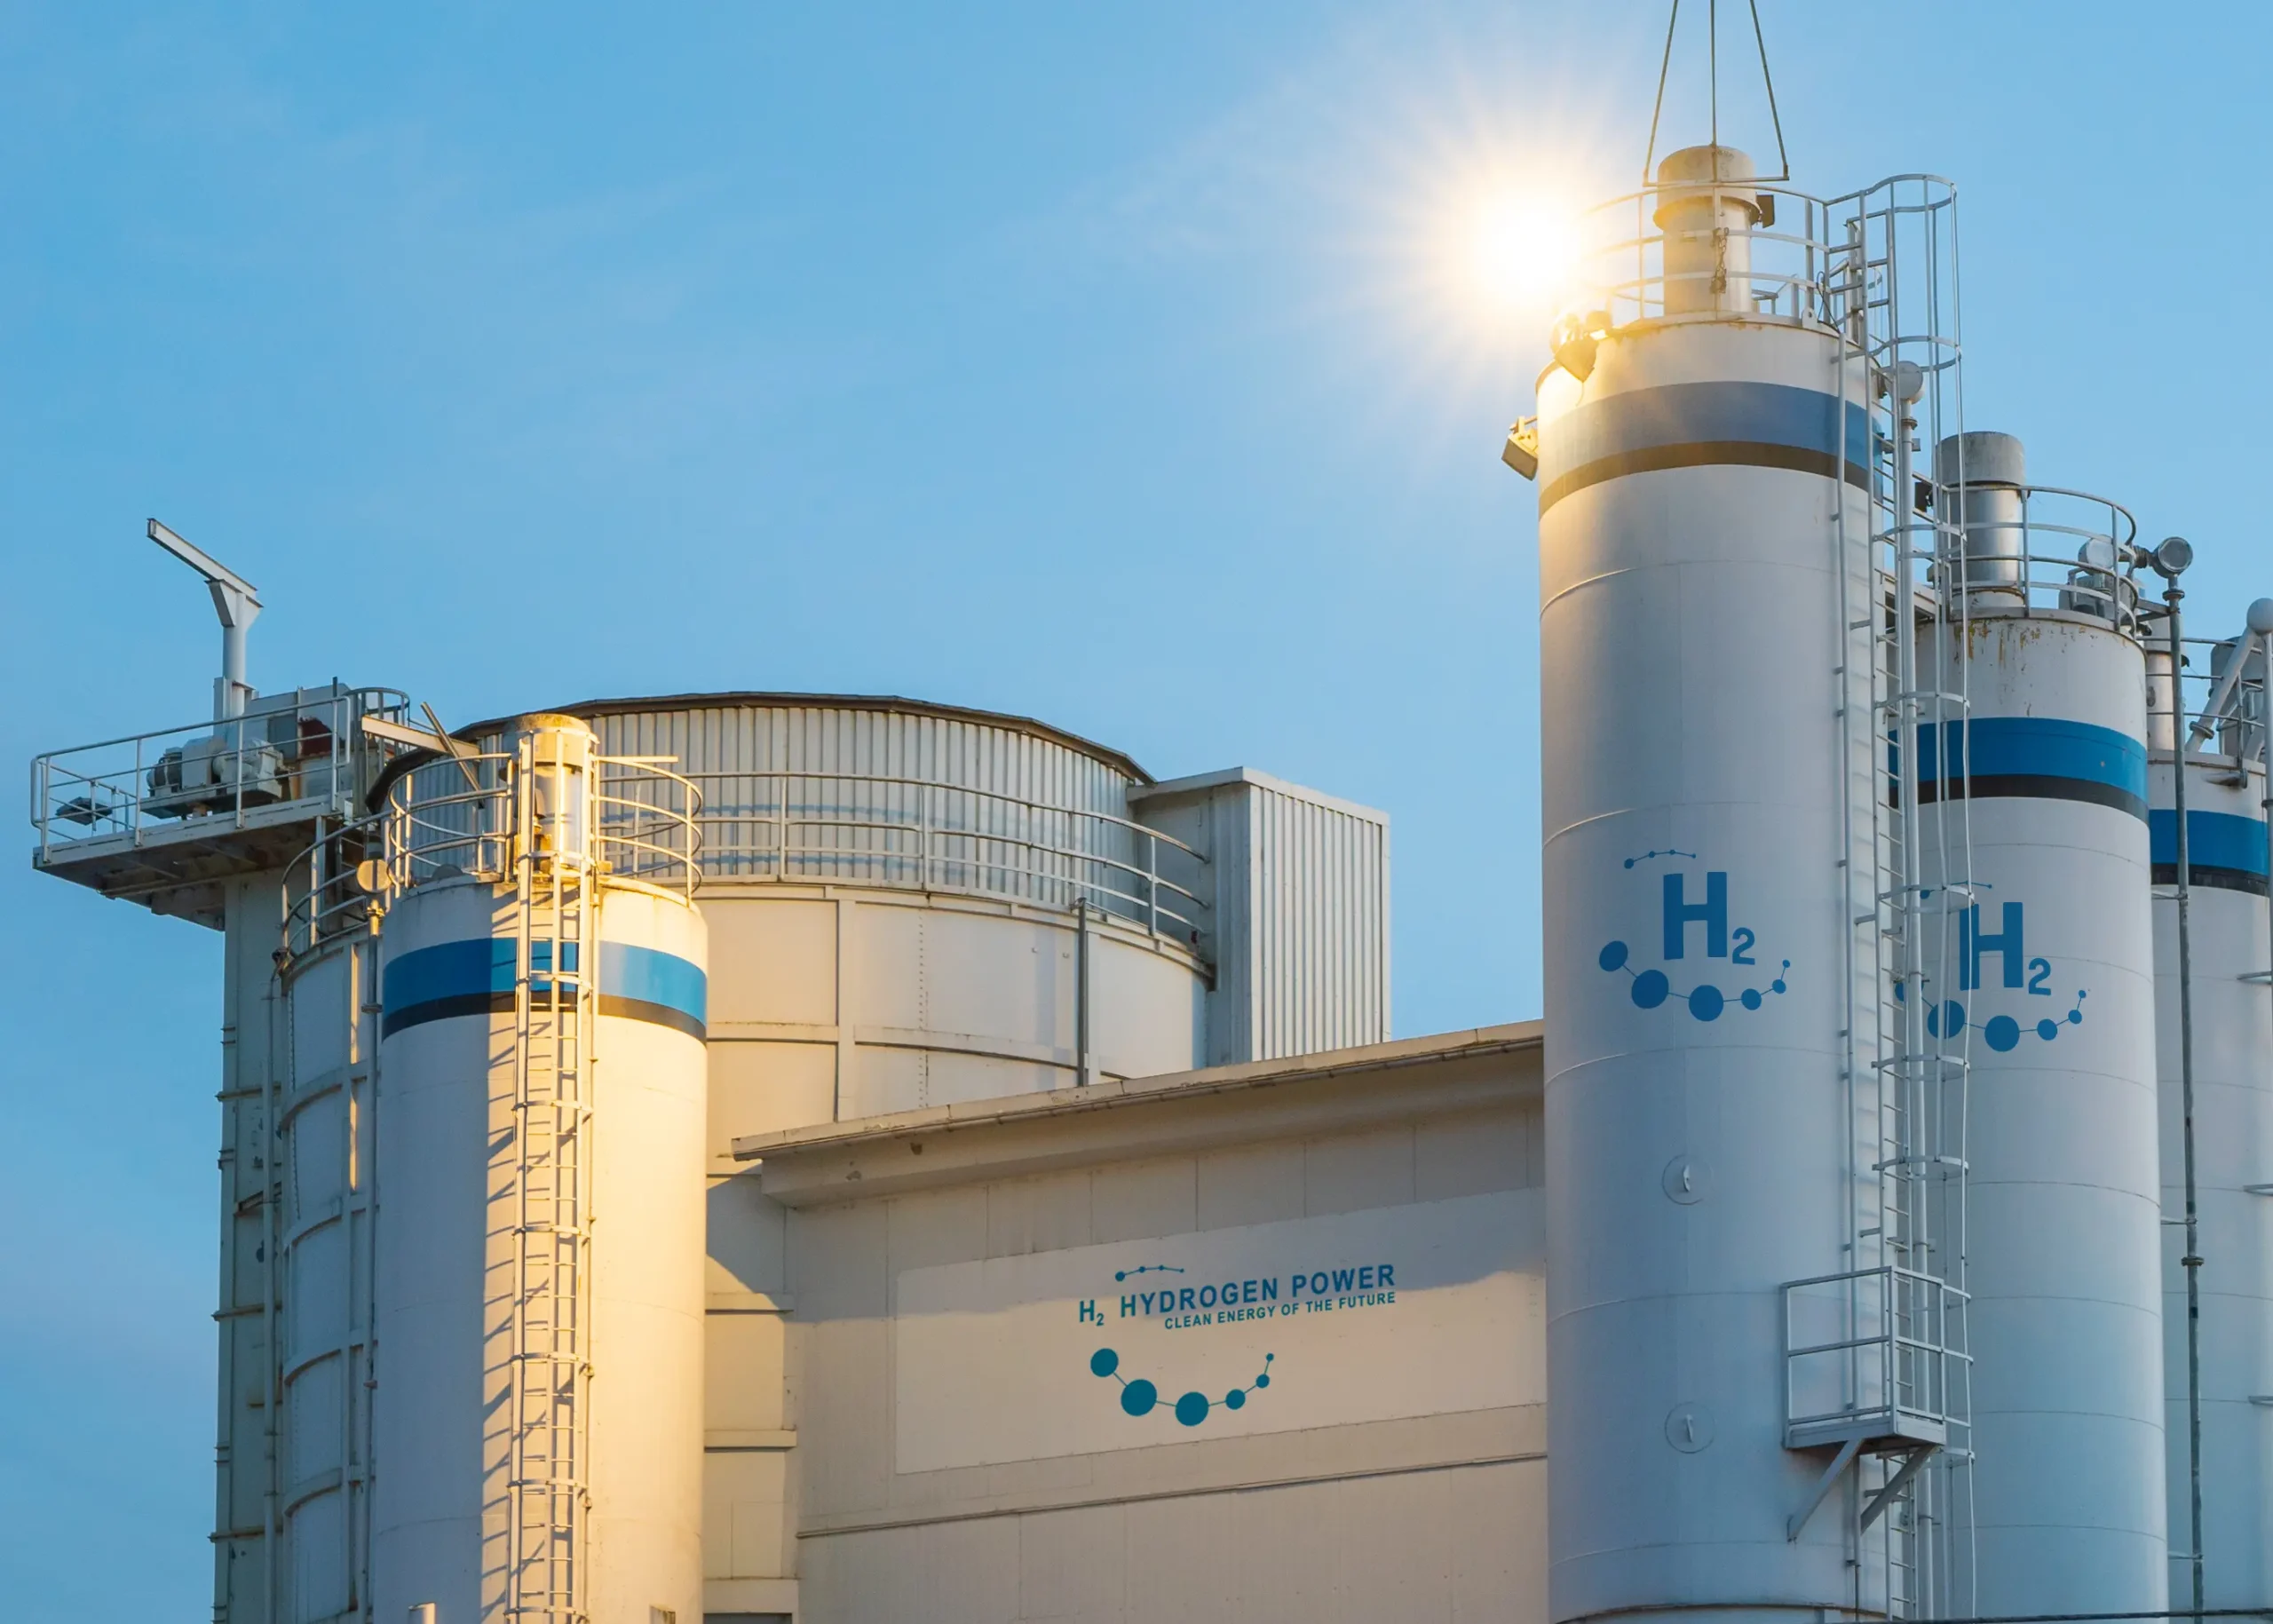 Actuators enable efficient hydrogen production from solar and wind, supporting clean electricity with reliable industrial valve solutions.